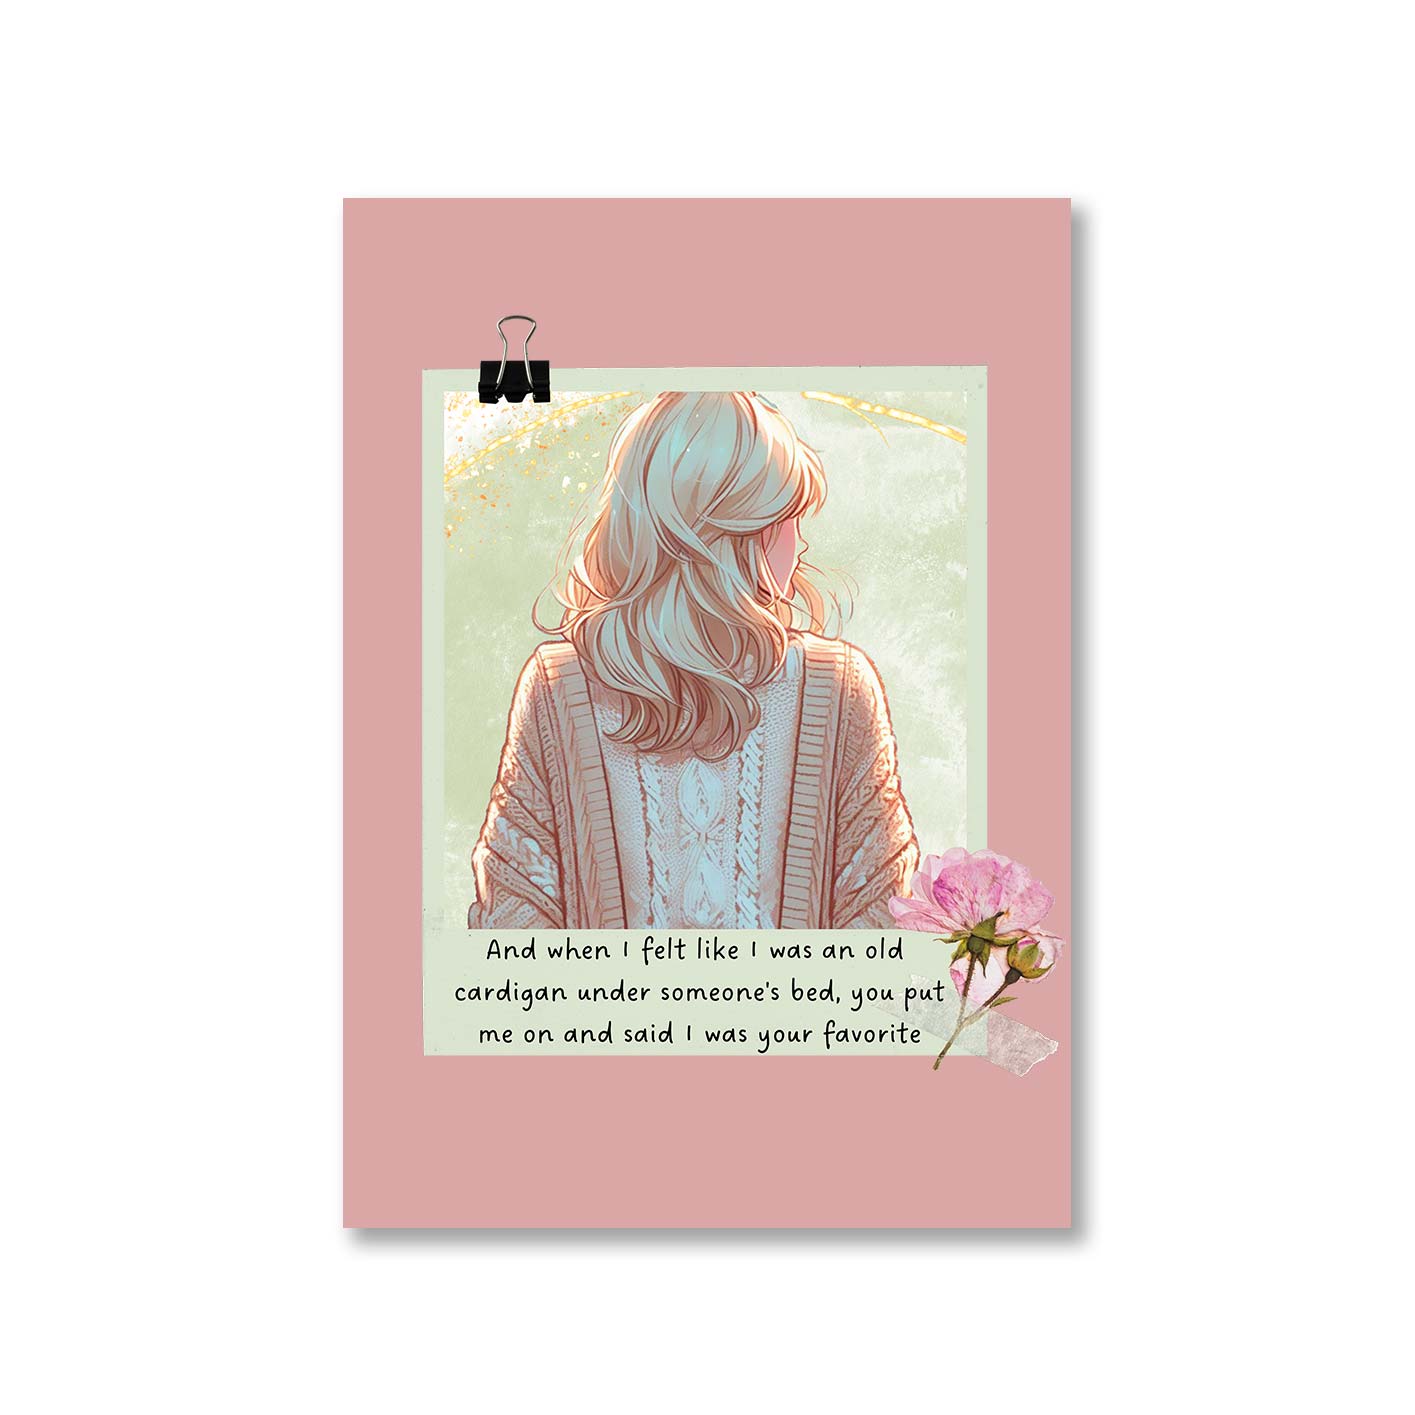 taylor swift old cardigan poster wall art buy online india the banyan tee tbt a4 